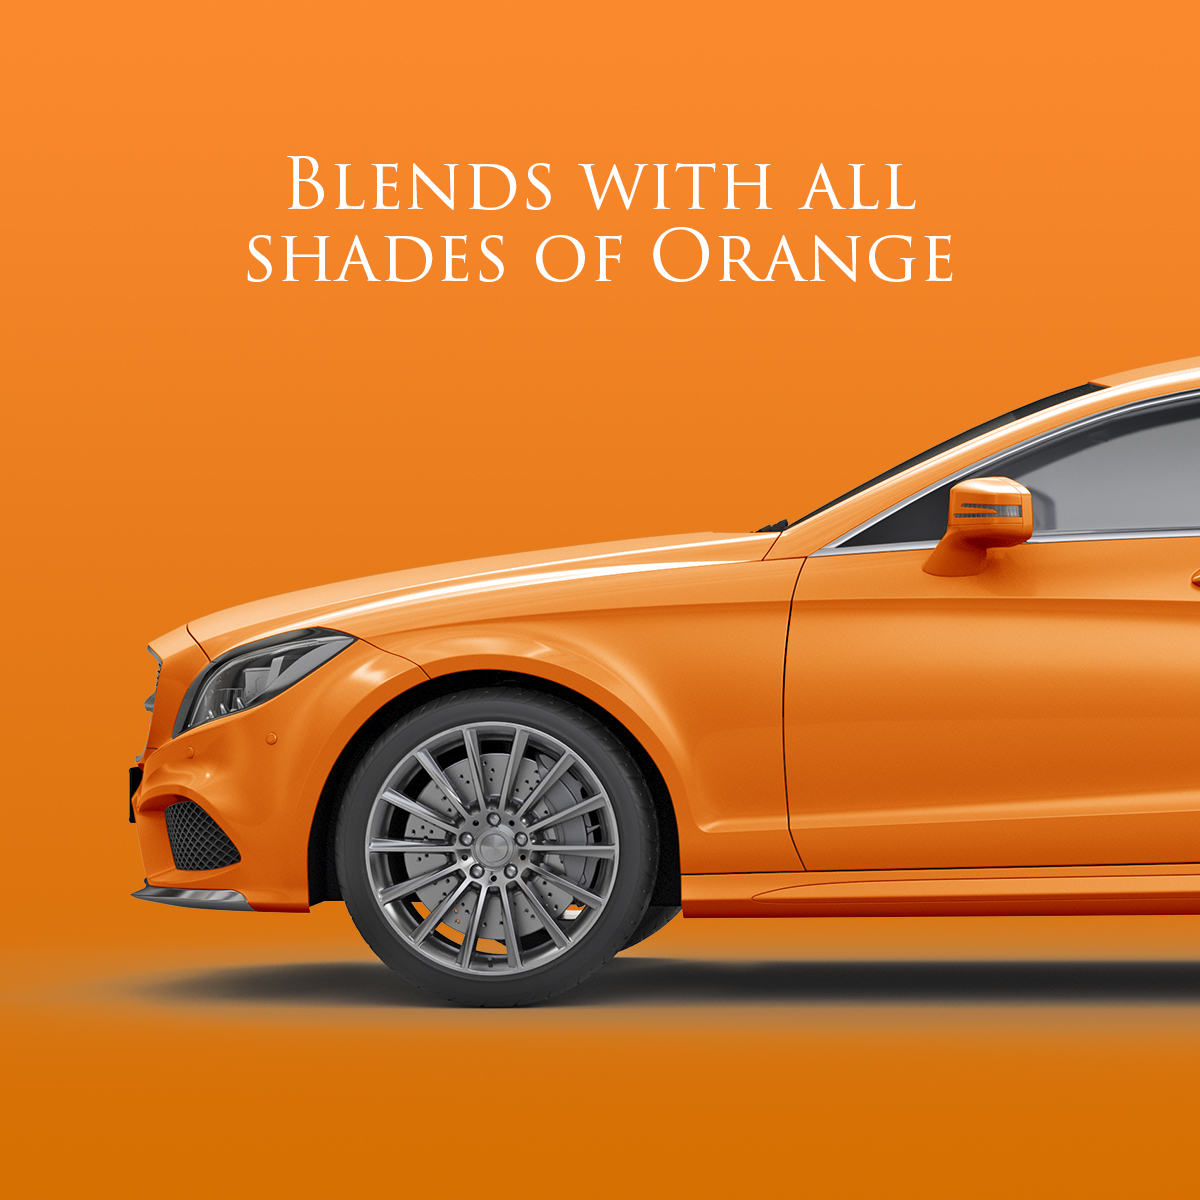 Blends with all shades of orange